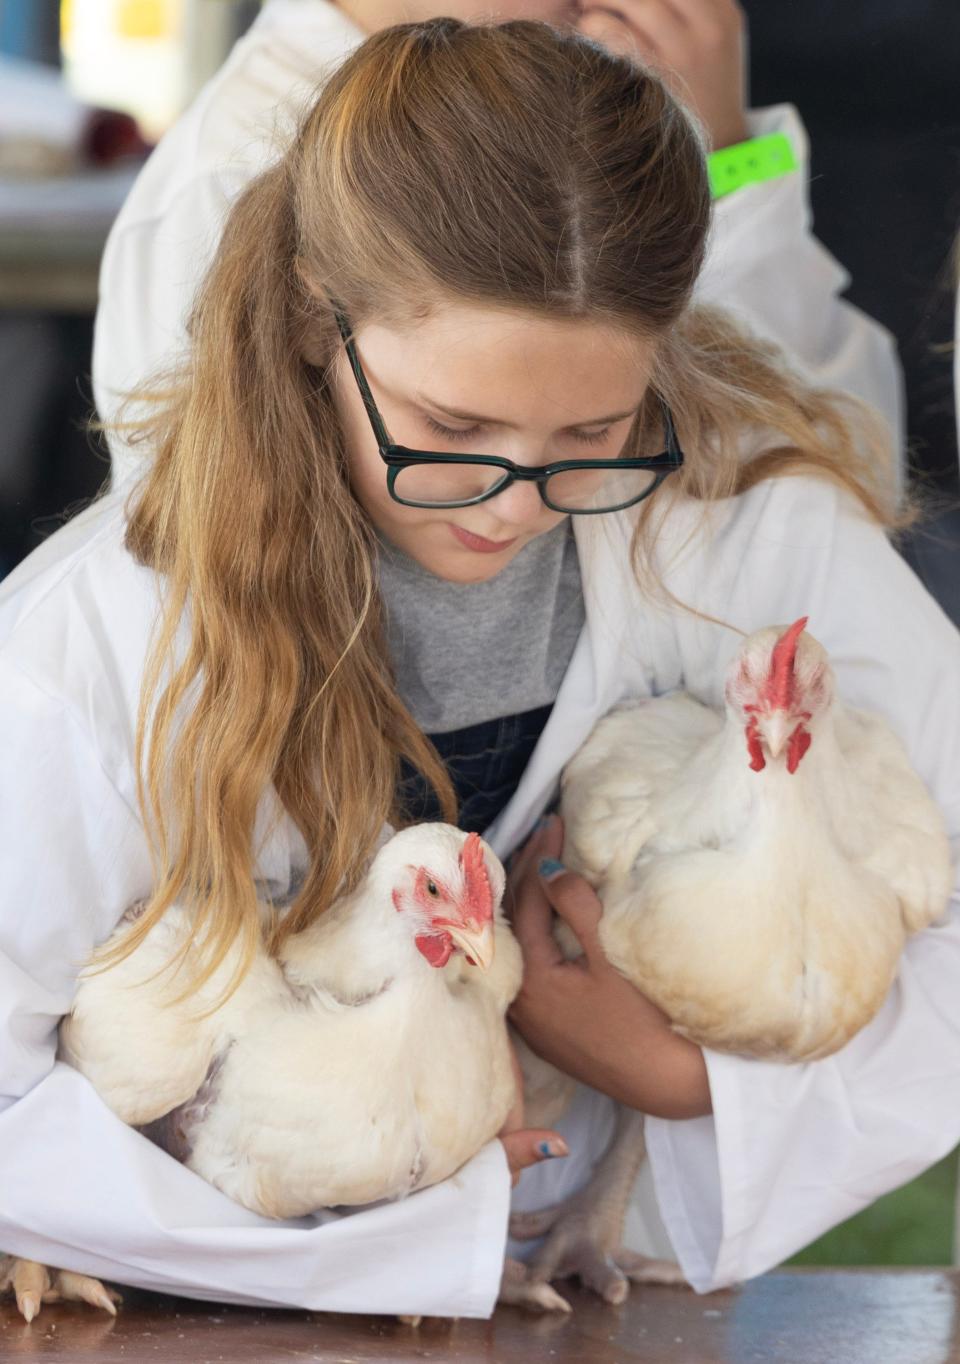 Paisley Wyatt, 10, of East Canton works to contain her broiler chickens during judging at the Stark County Fair on Tuesday.